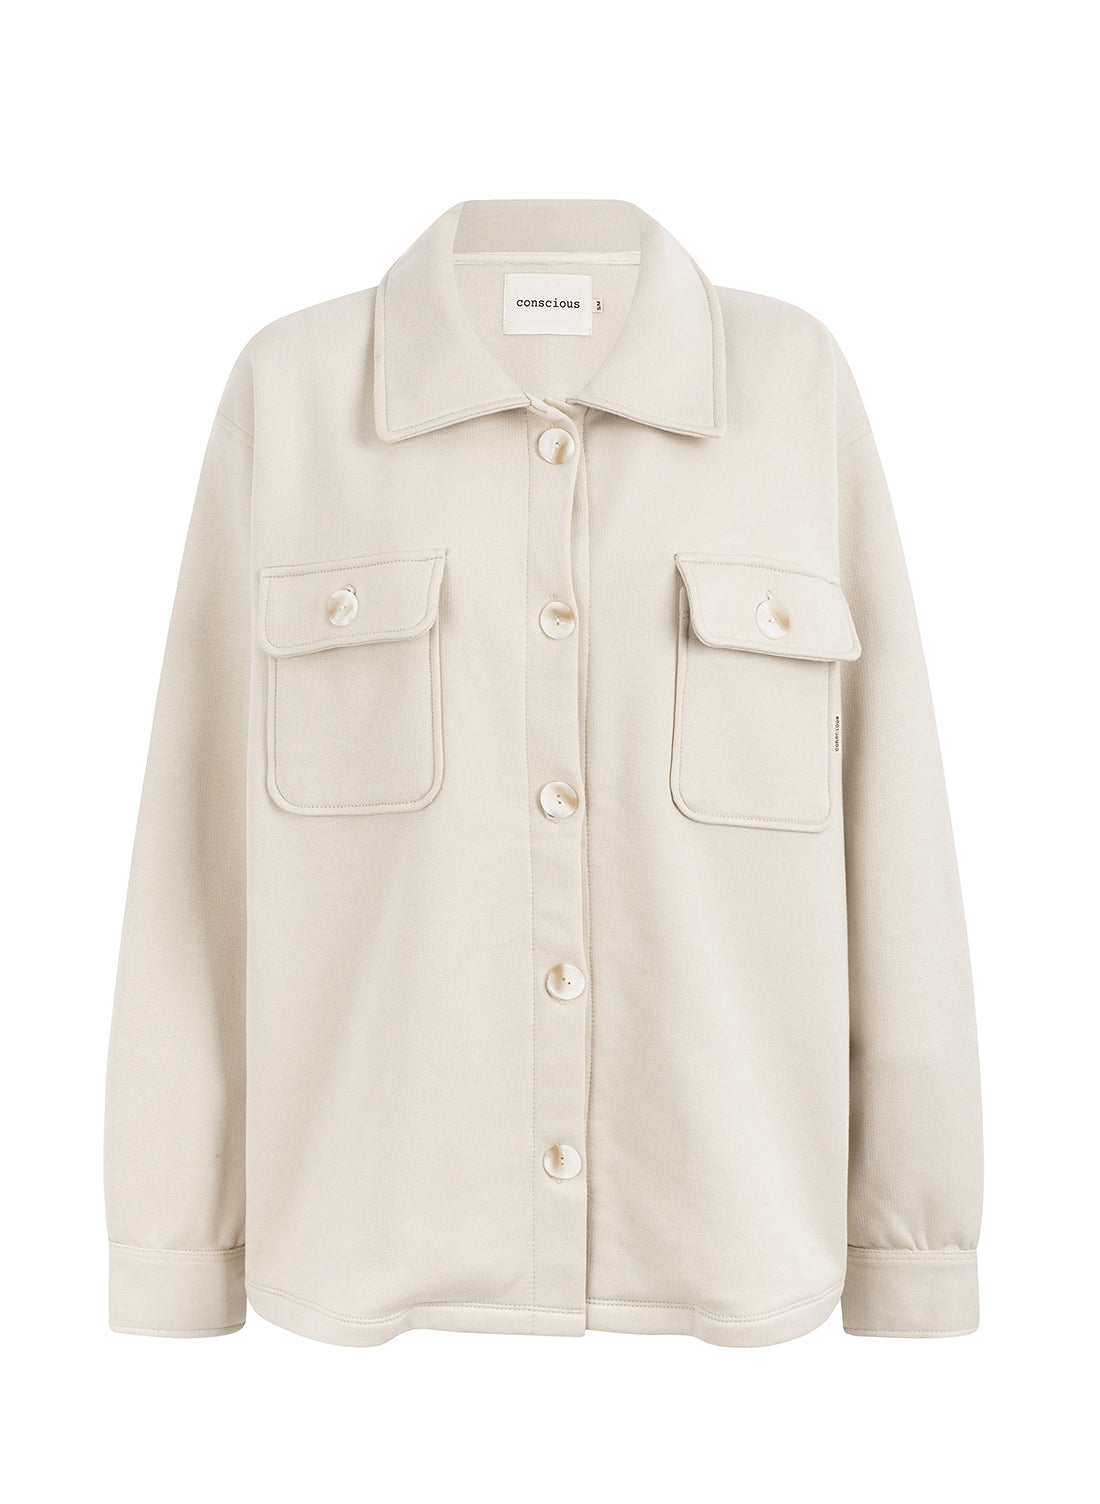 organic cotton shirt-jacket in beige – Conscious the label